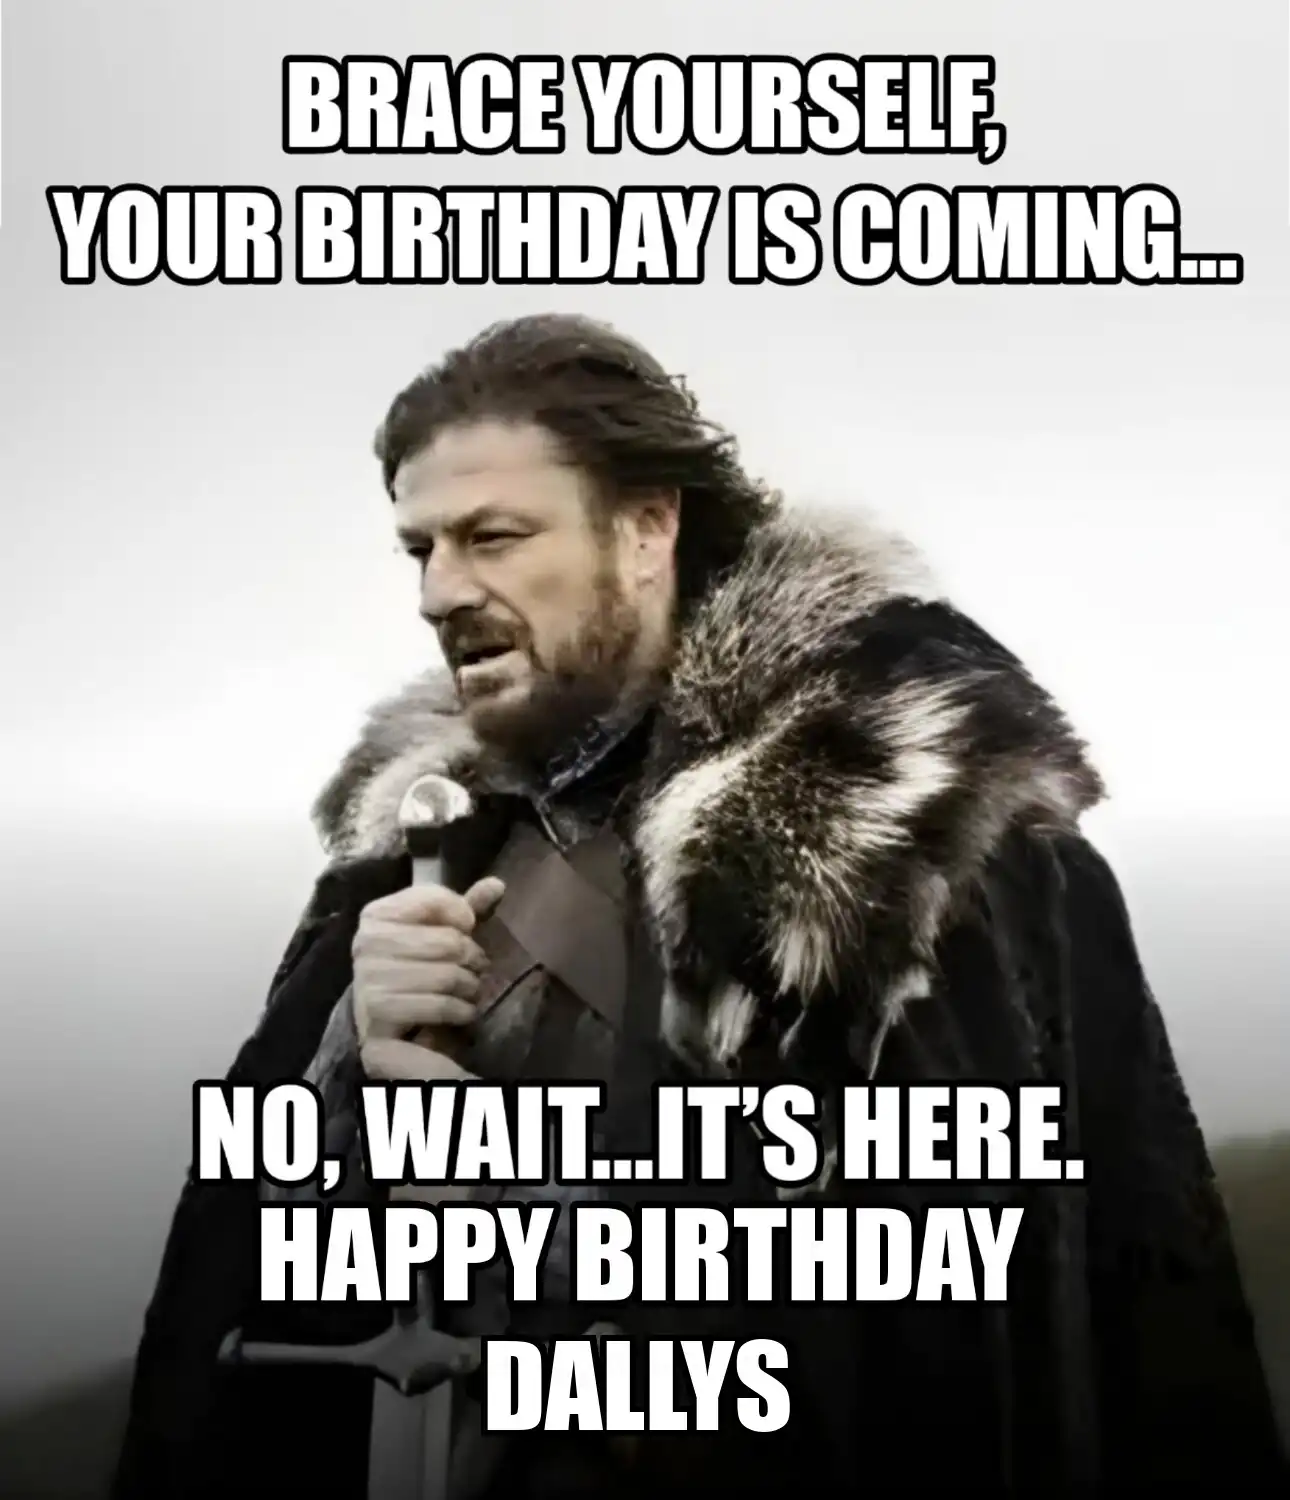 Happy Birthday Dallys Brace Yourself Your Birthday Is Coming Meme